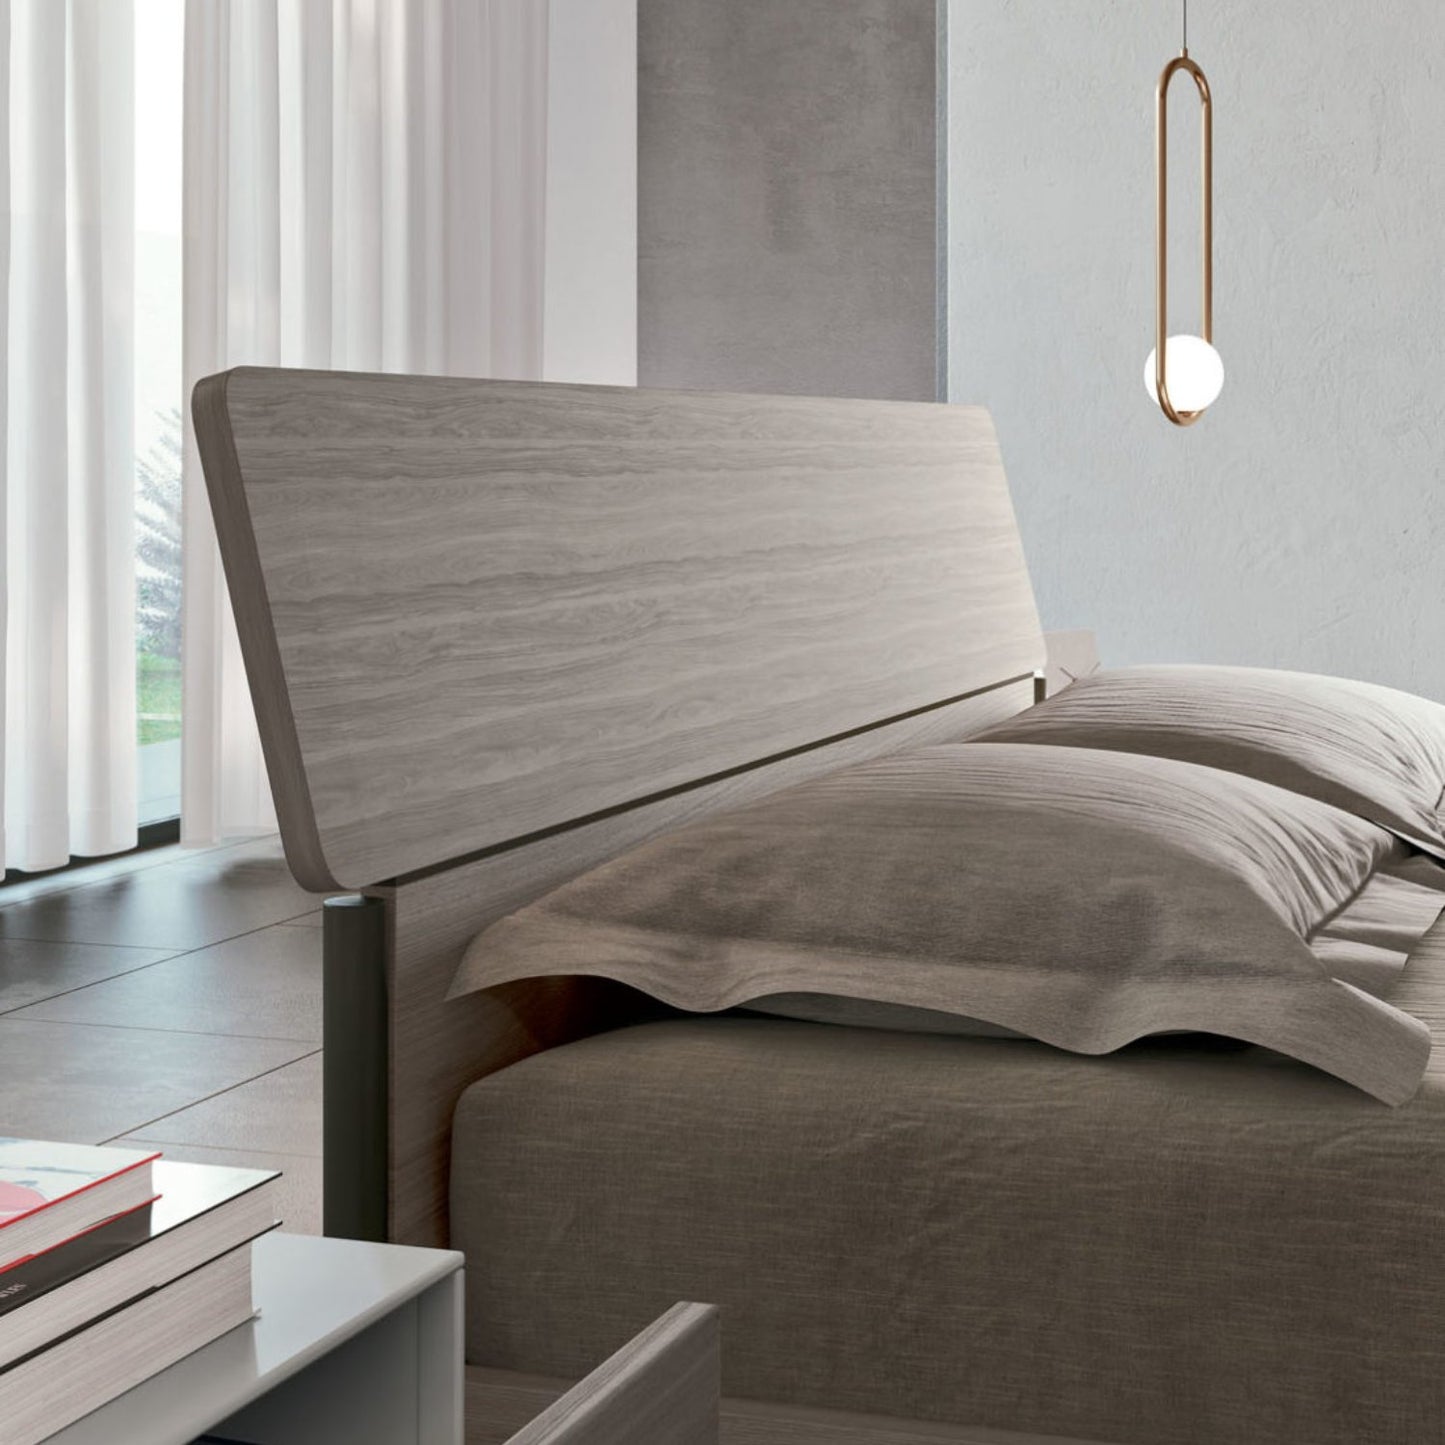 Adele Wooden Bed by Orme Design